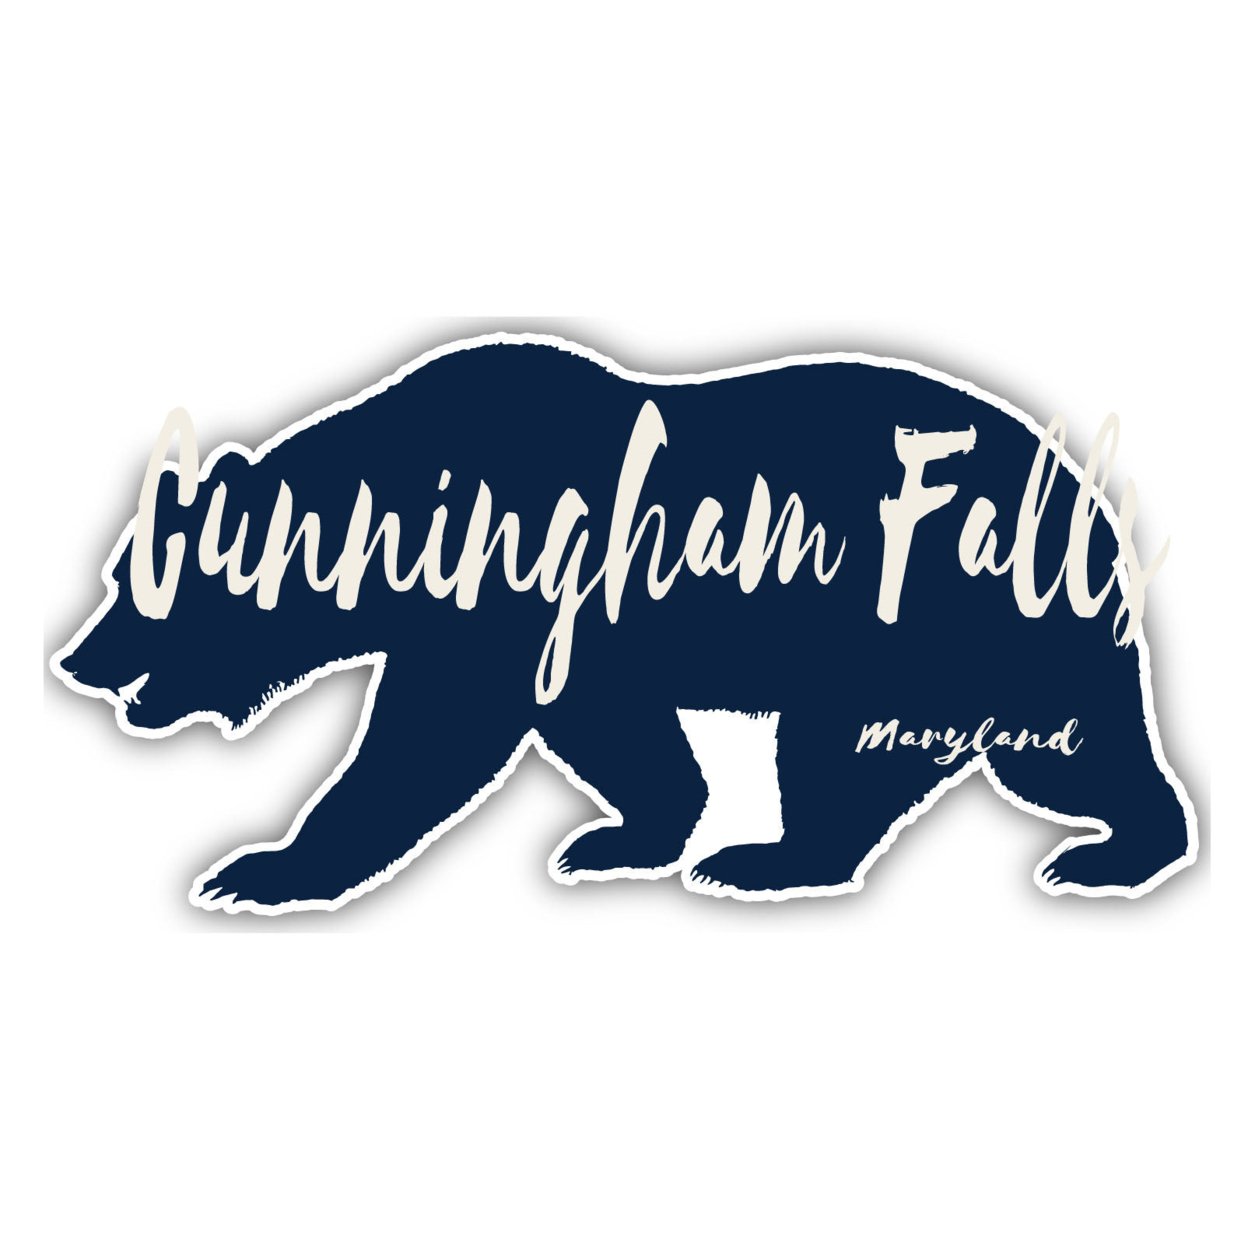 Cunningham Falls Maryland Souvenir Decorative Stickers (Choose Theme And Size) - Single Unit, 12-Inch, Bear